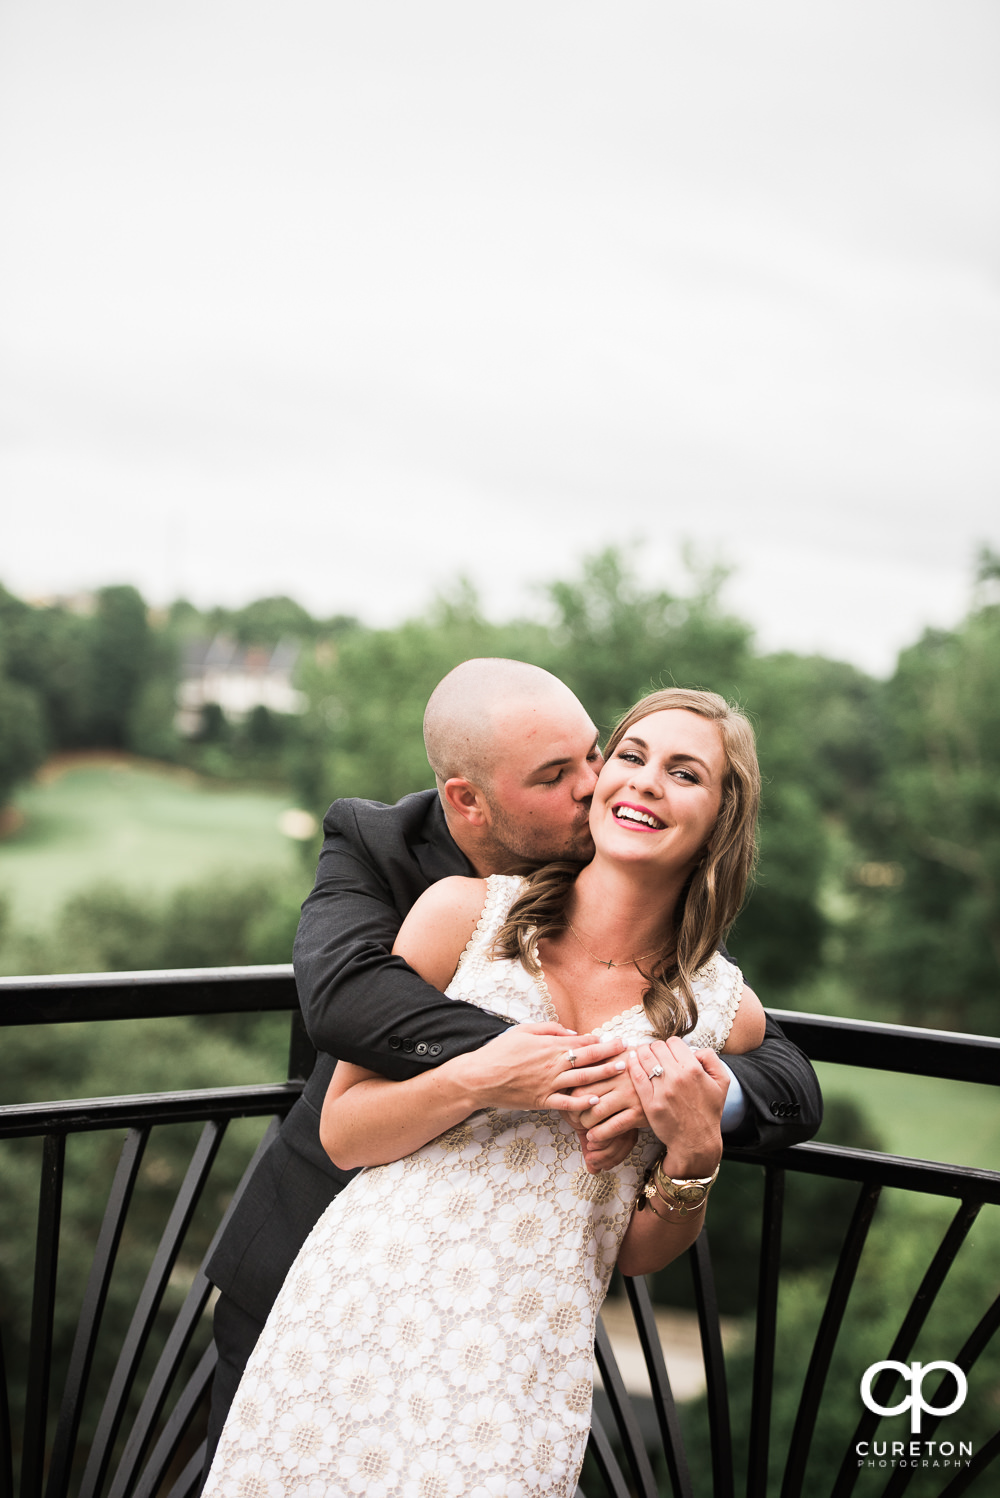 Groom kissing his bride at their wedding rehearsal dinner at the Thornblade Country Club in Greenville , SC .